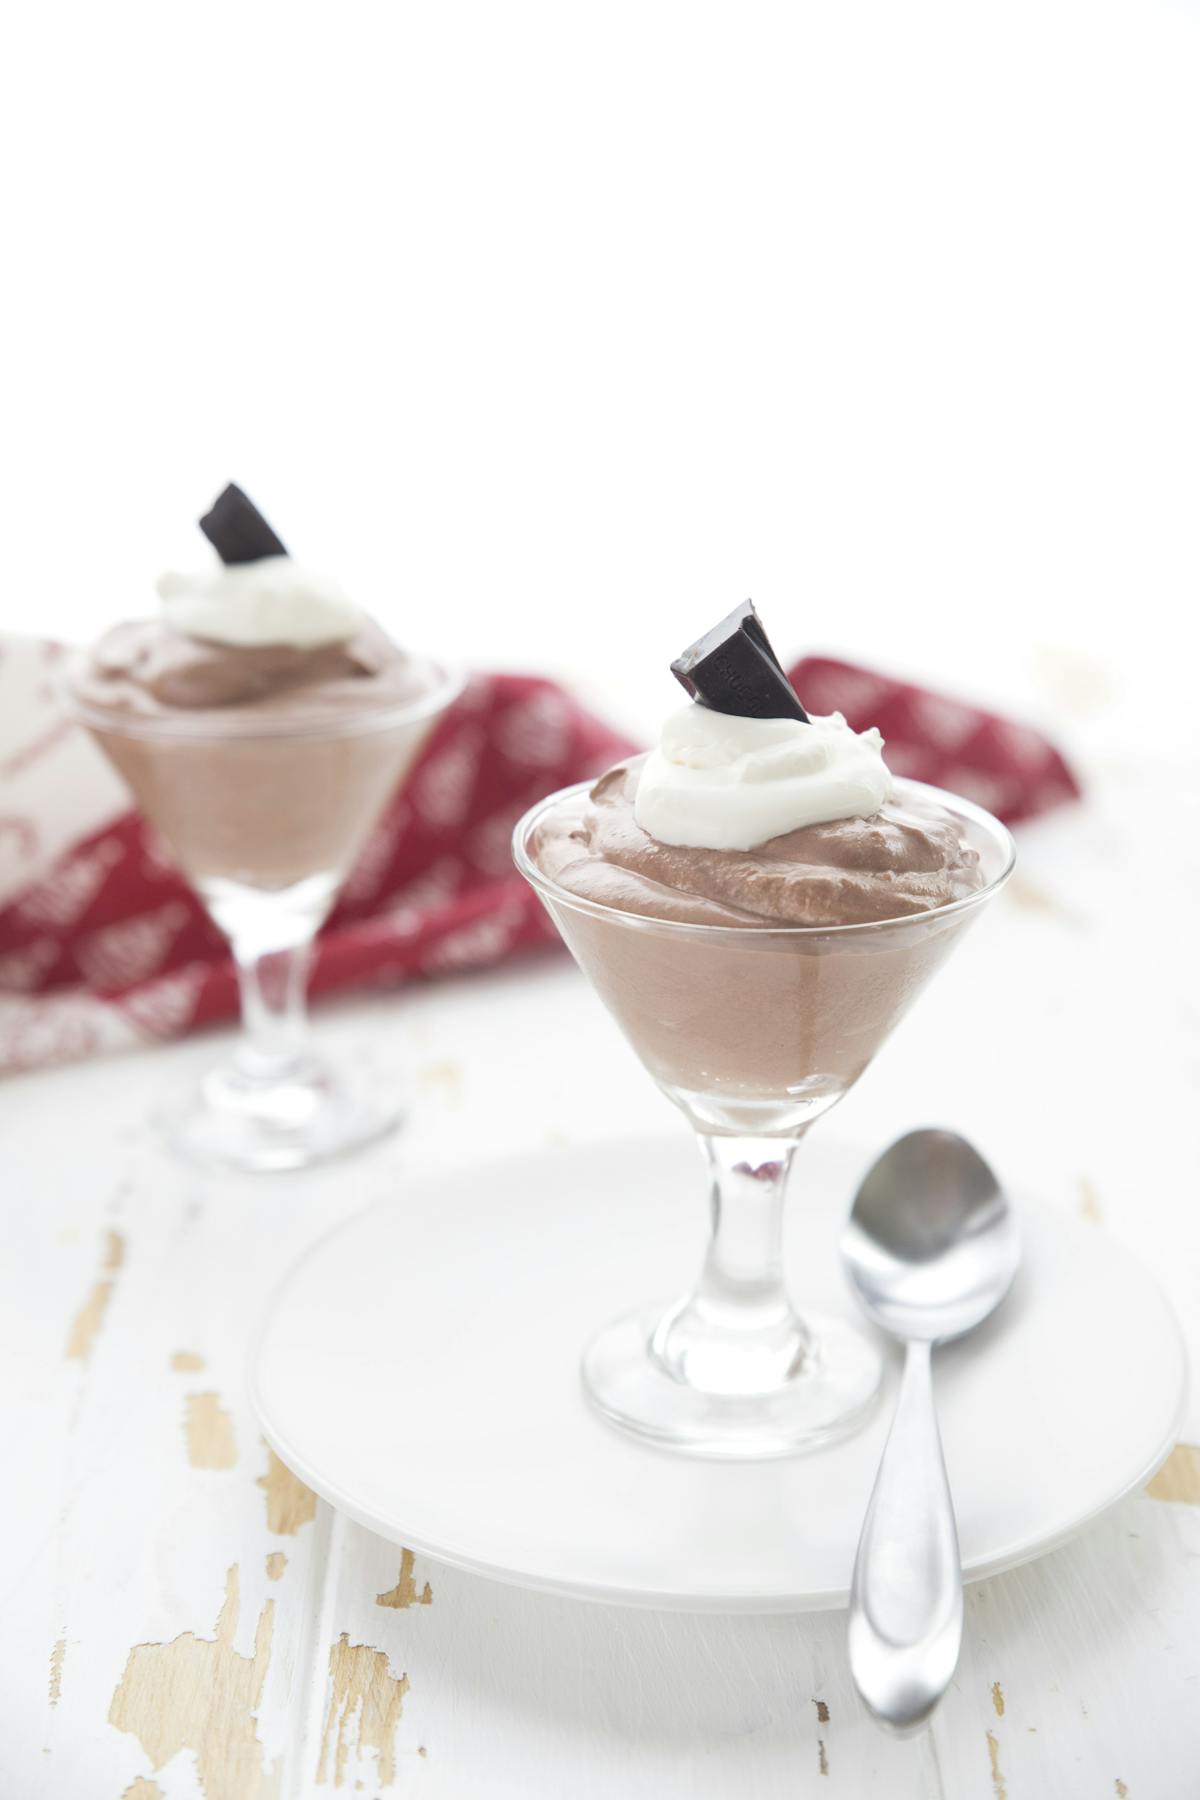 Low-carb chocolate peppermint cheesecake mousse